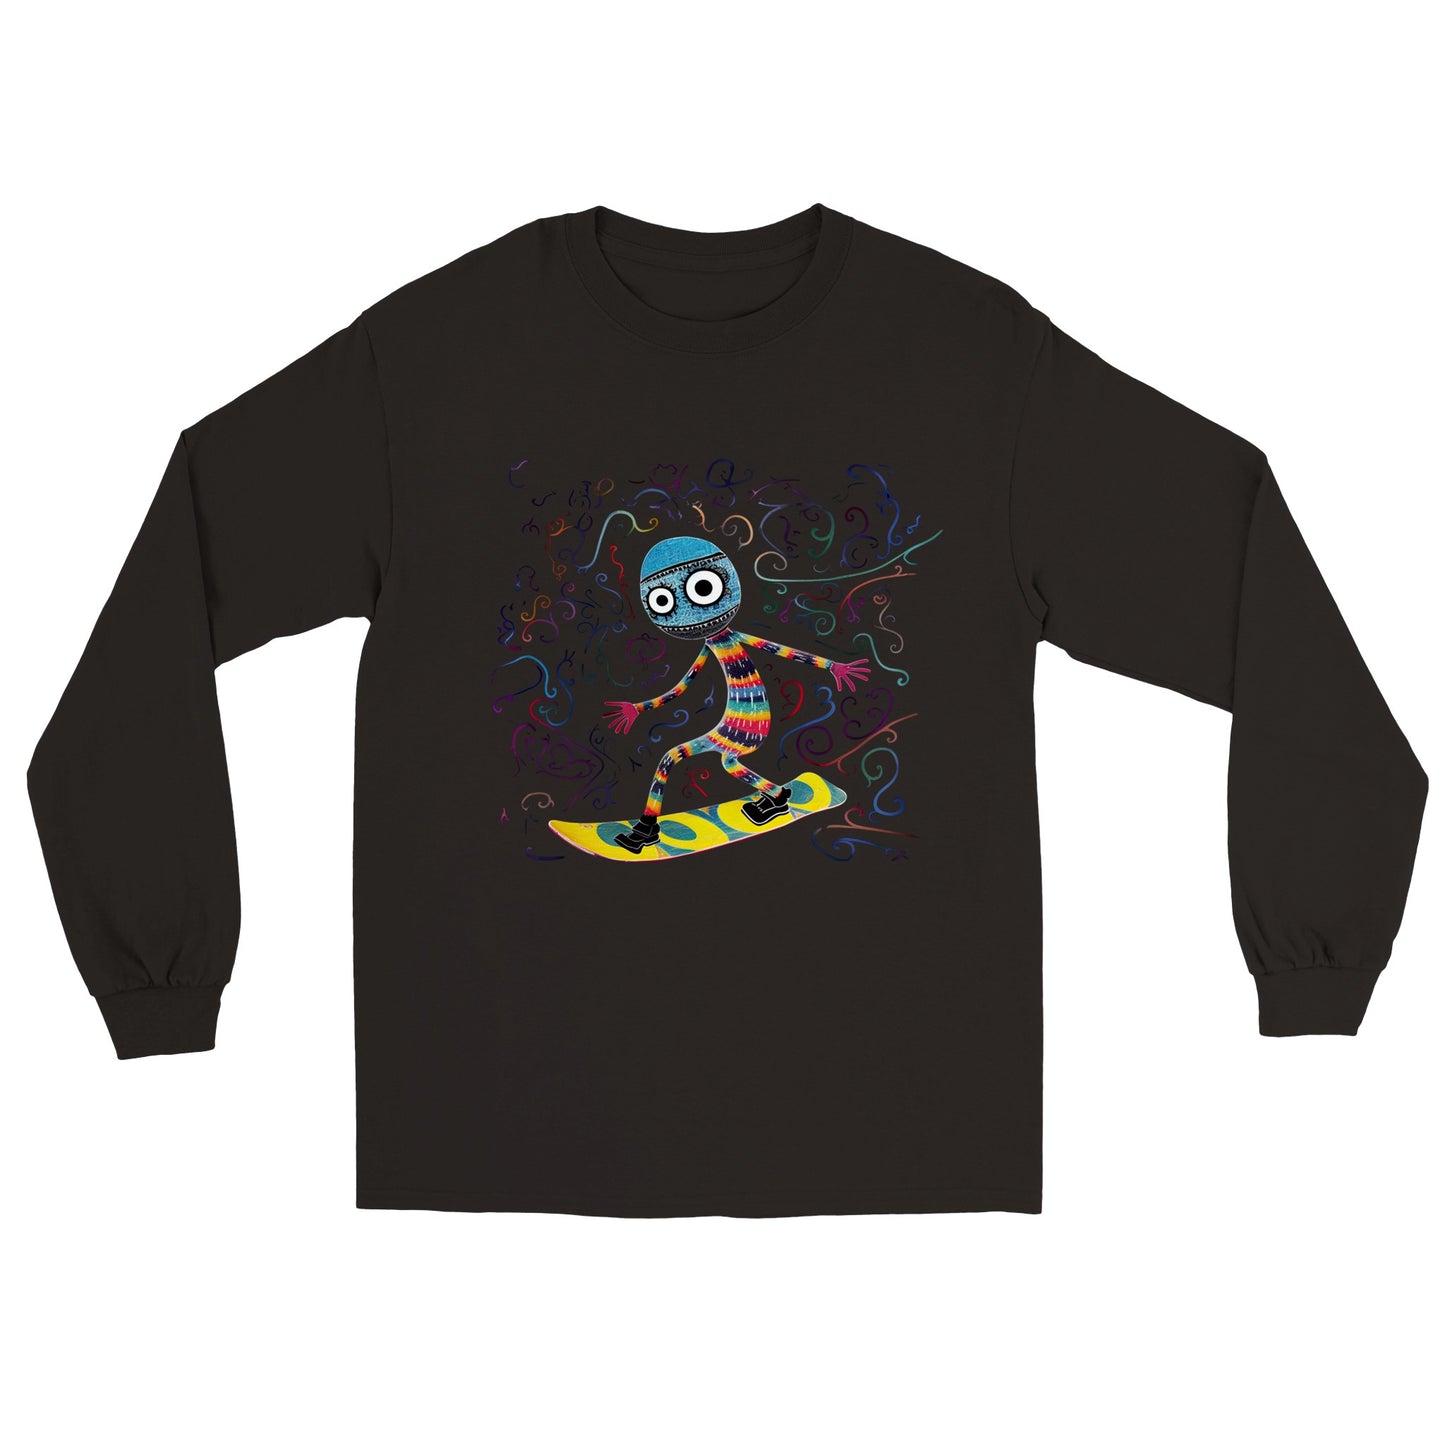 black long sleeve t-shirt with an abstract snowboarder print